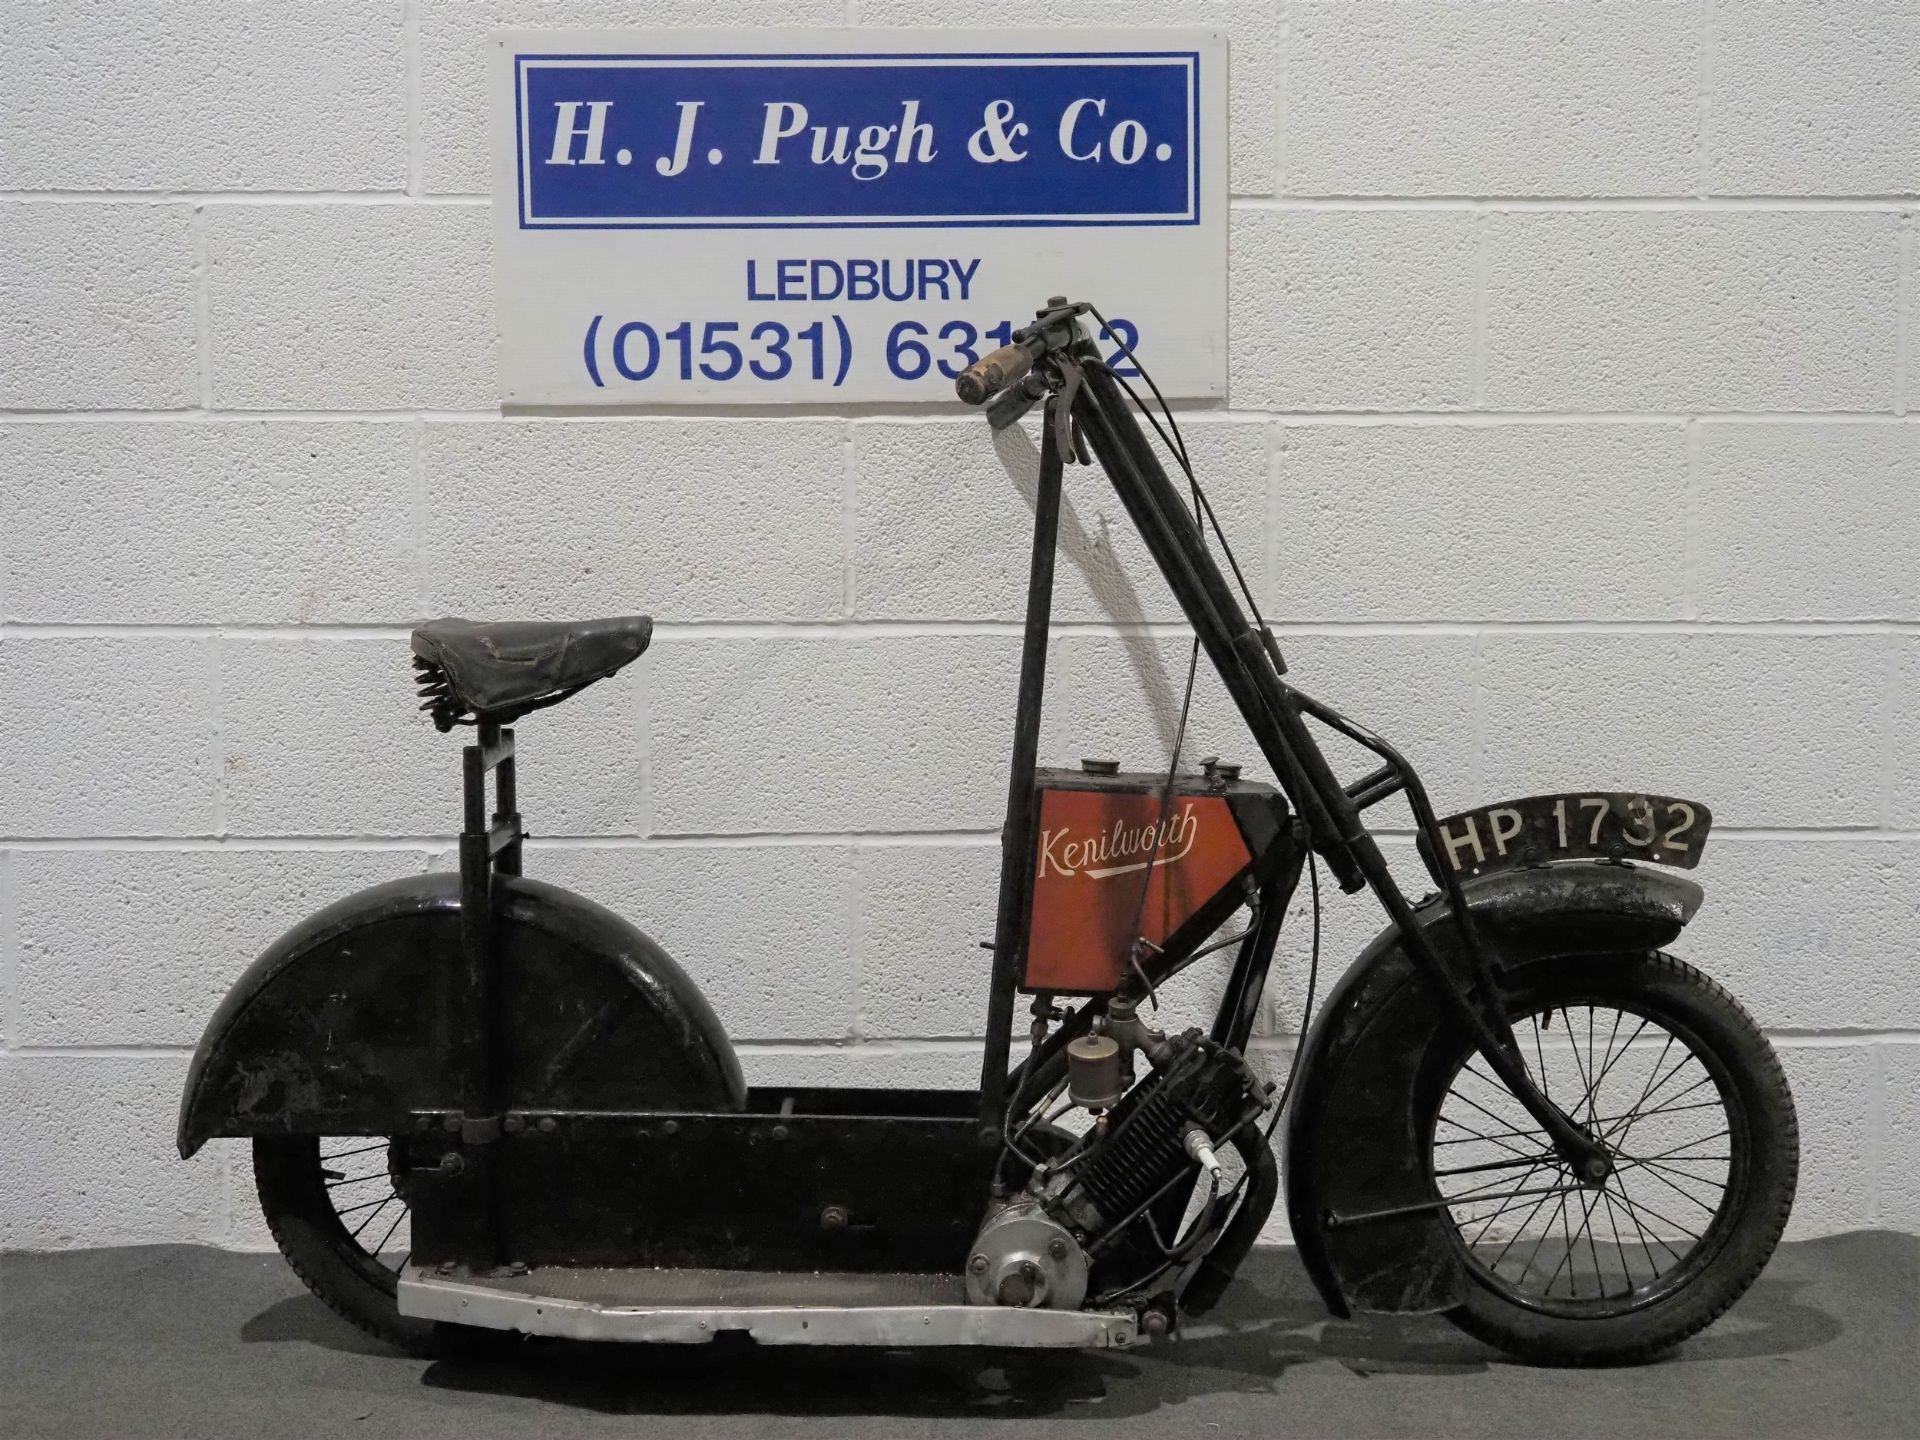 Kenilworth scooter. 1921. 142cc. Frame No. 671681. Engine No. 599/19. Believed to be 1 of only 2